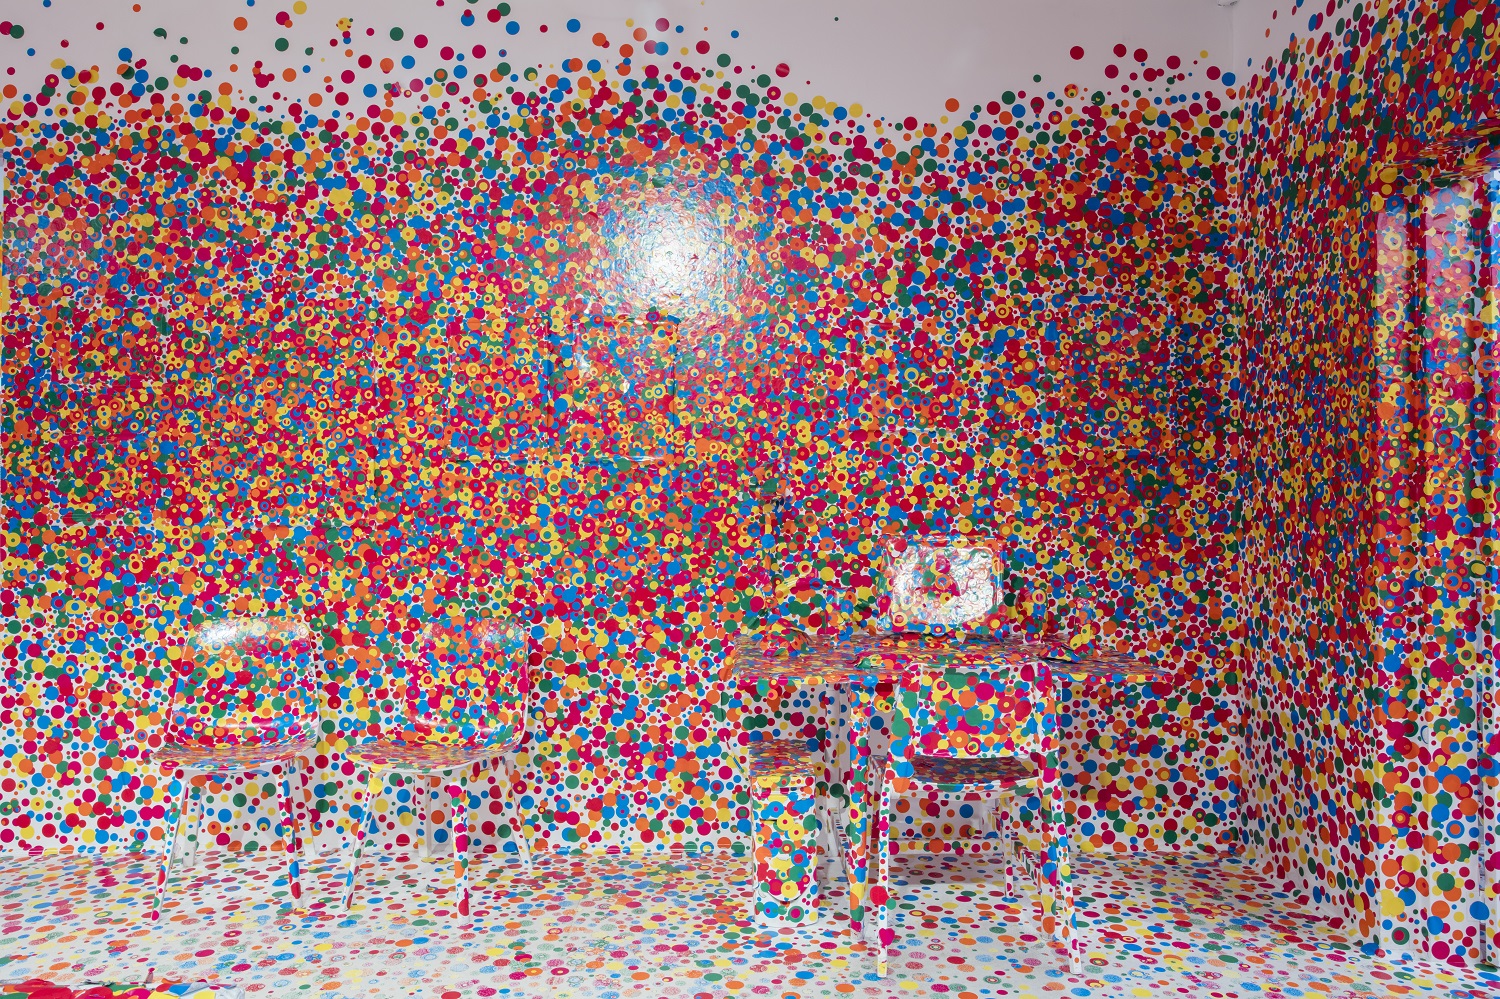 A computer desk and chairs covered in bright polka dots as part of Yayoi Kusama's The Obliteration Room.